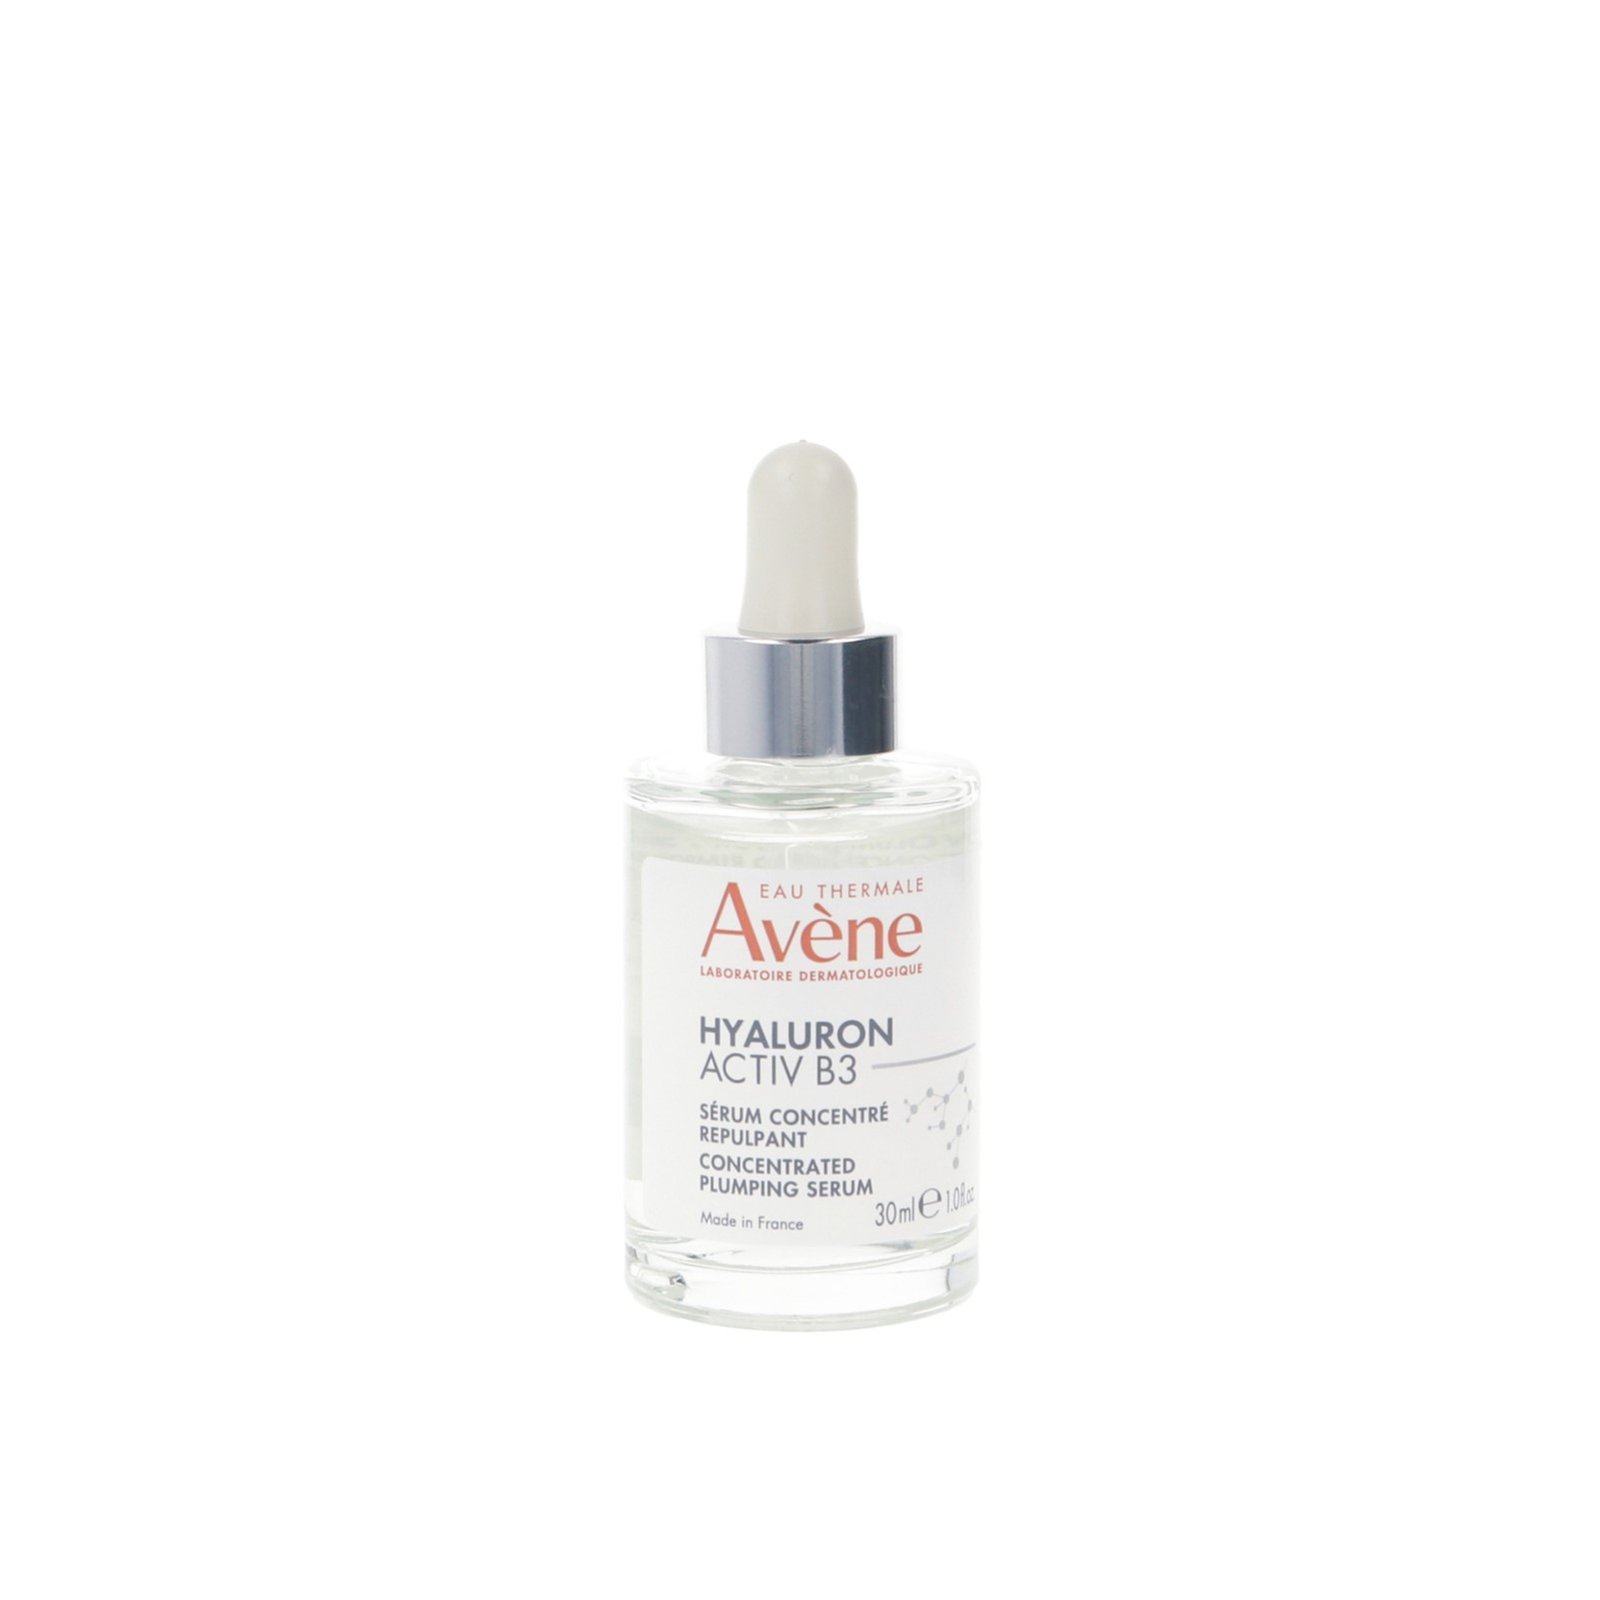 Avène Hyaluron Activ B3 Concentrated Plumping Serum 30ml (1.0floz)